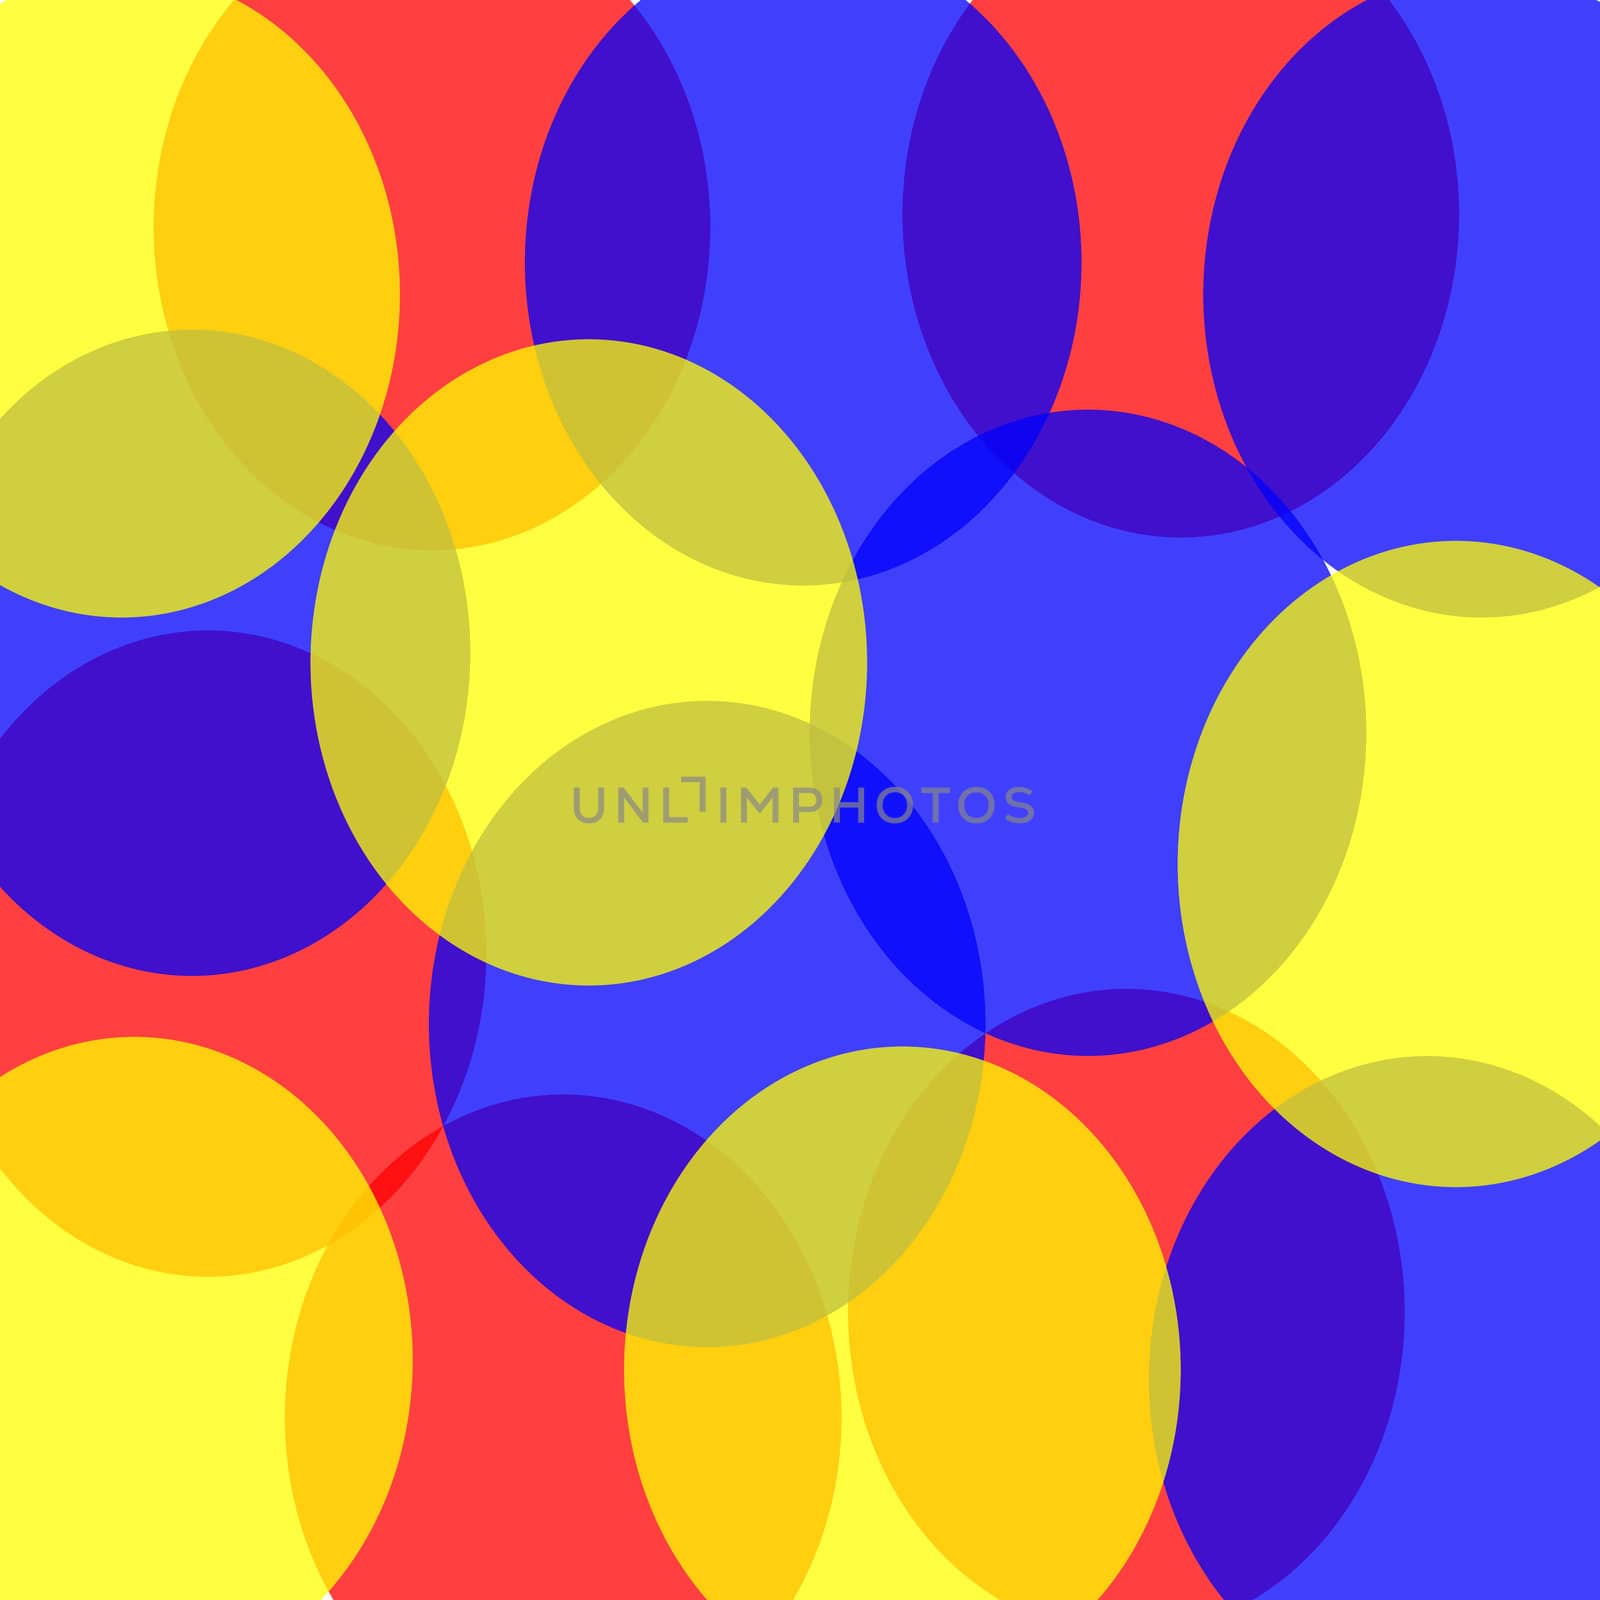 Transparent retro circles in red, blue, and yellow create a fun blast from the past background.